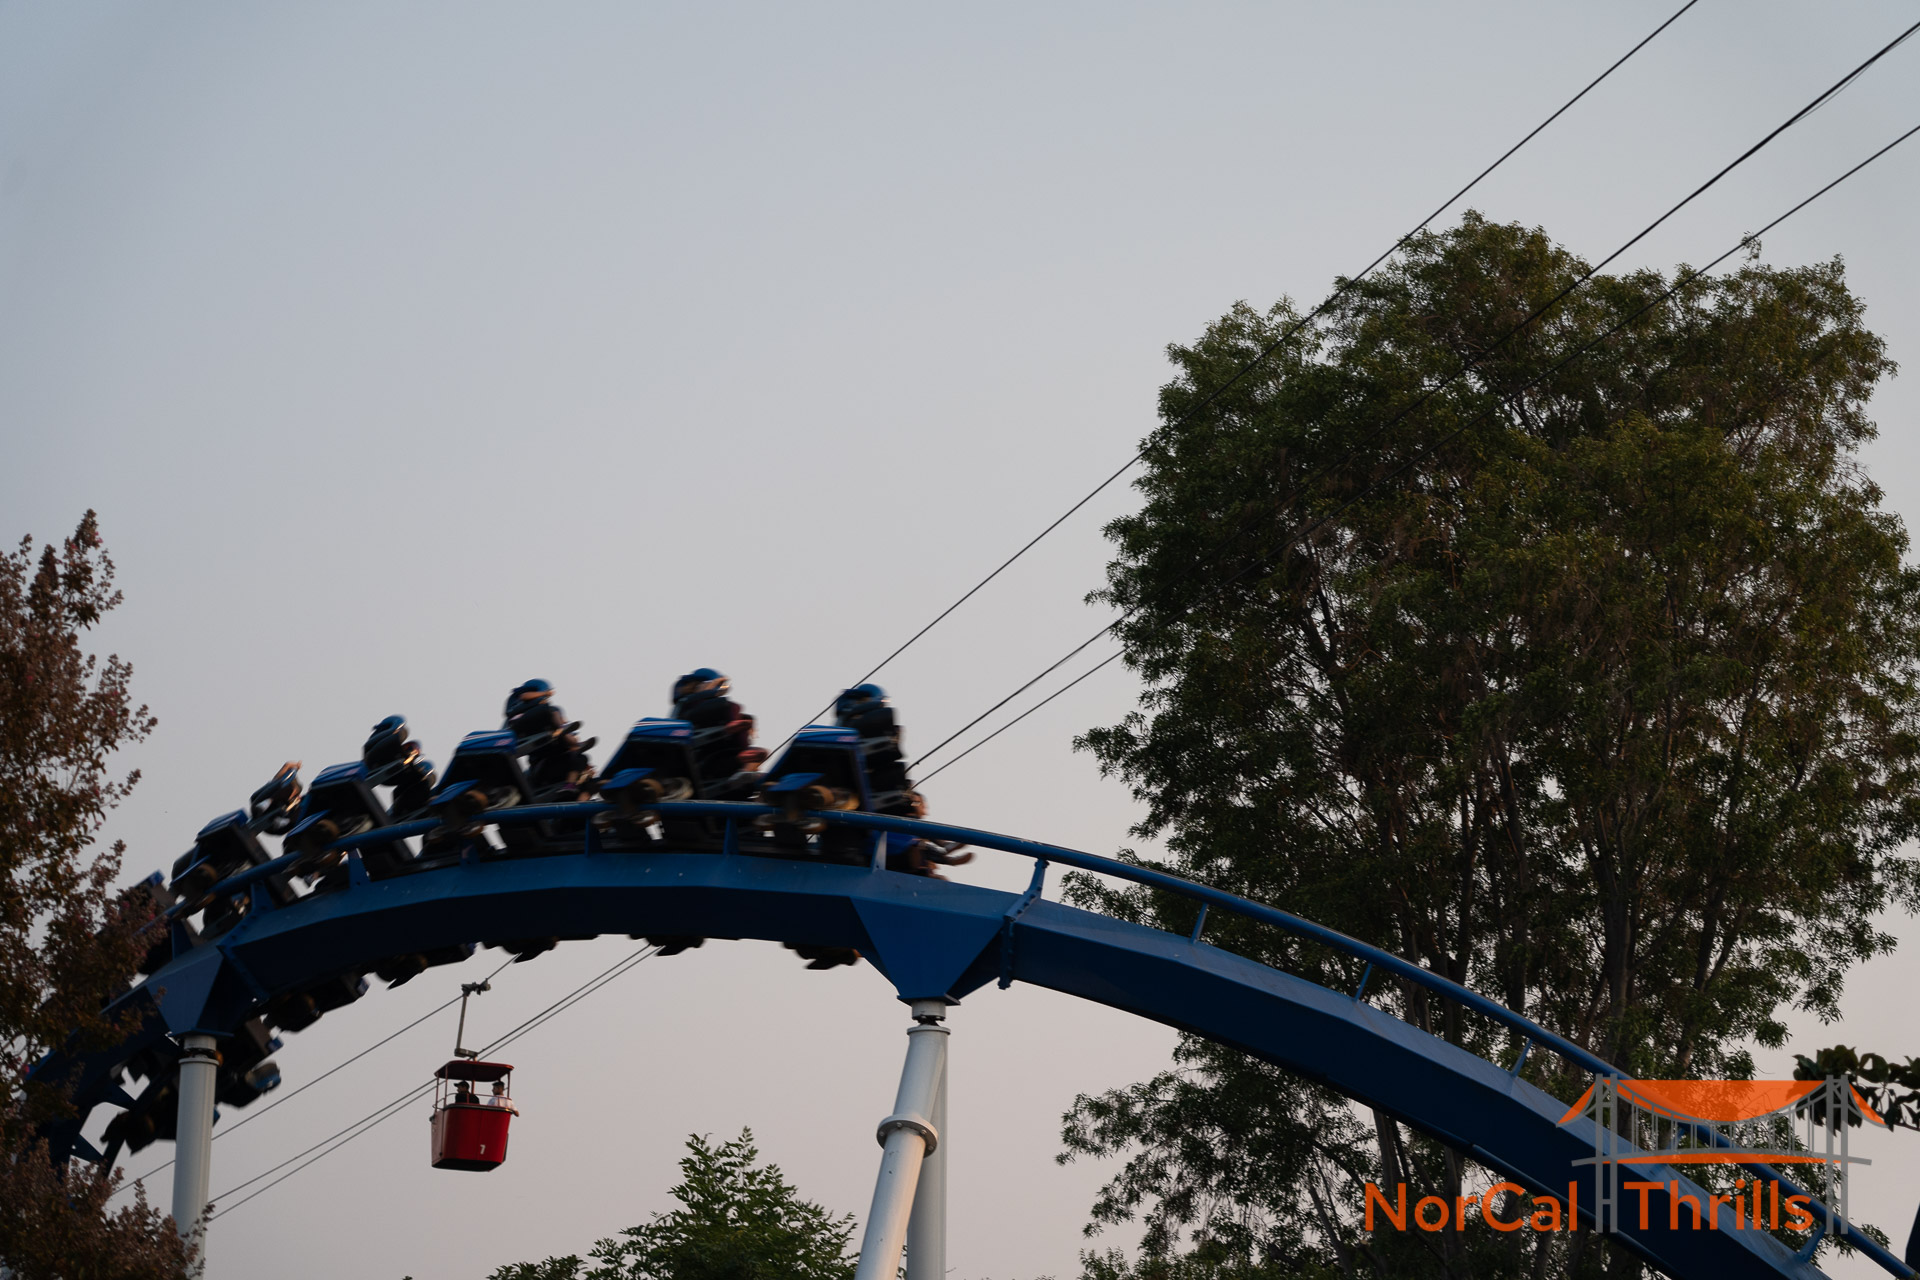 Ride Pictures